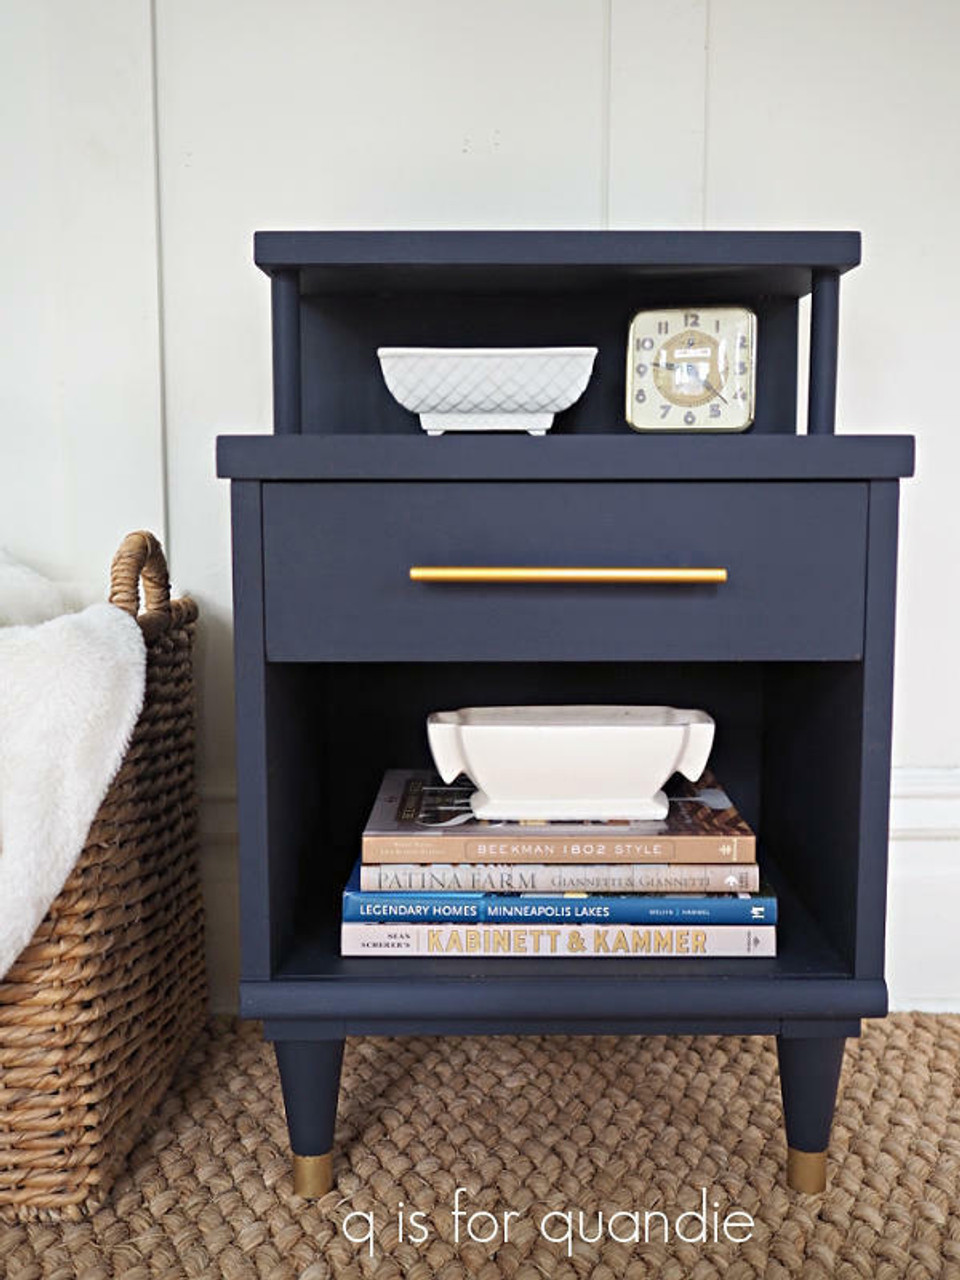 10 Quick Steps to a New and Improved Furniture with Silk All-in-One Mineral  Paint! 